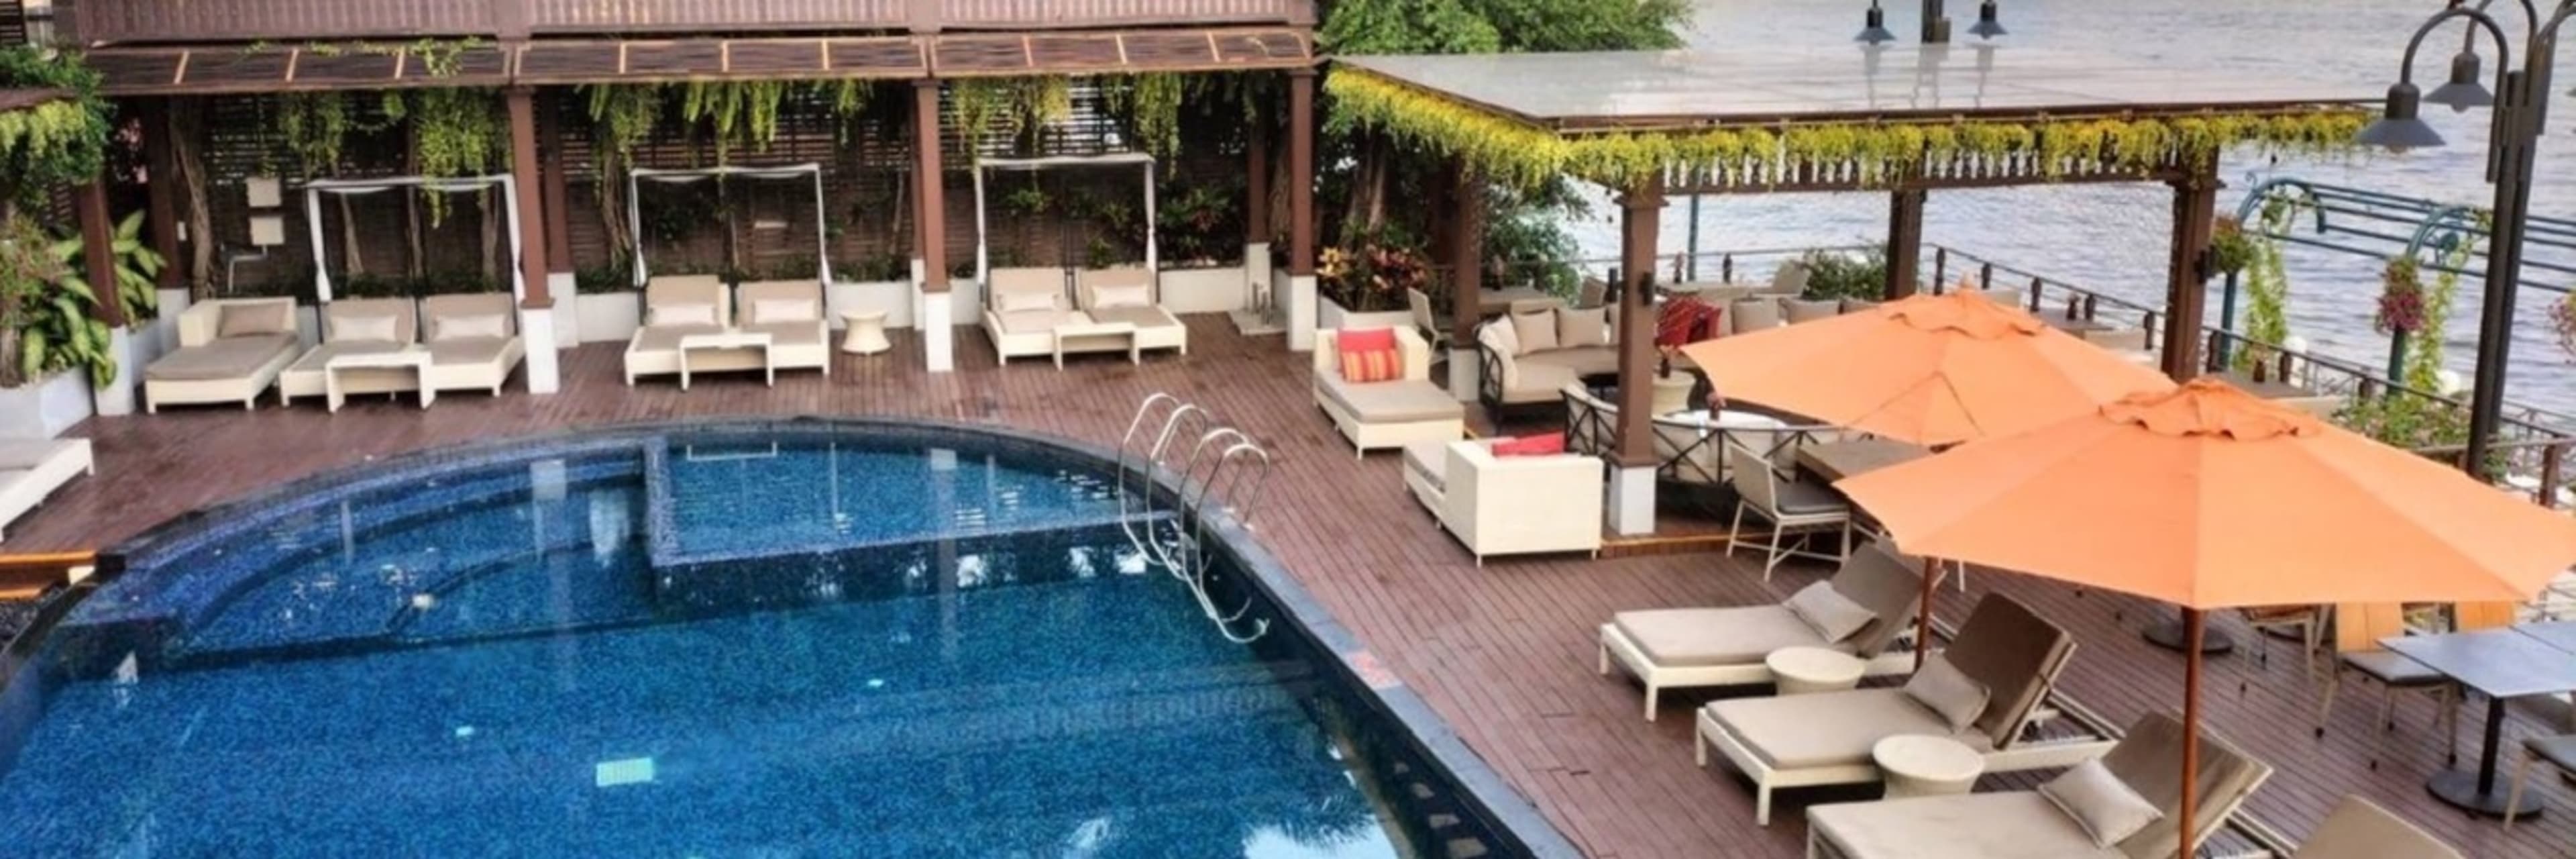 Riva Surya Pool Access with Drinks or Foot Massage 